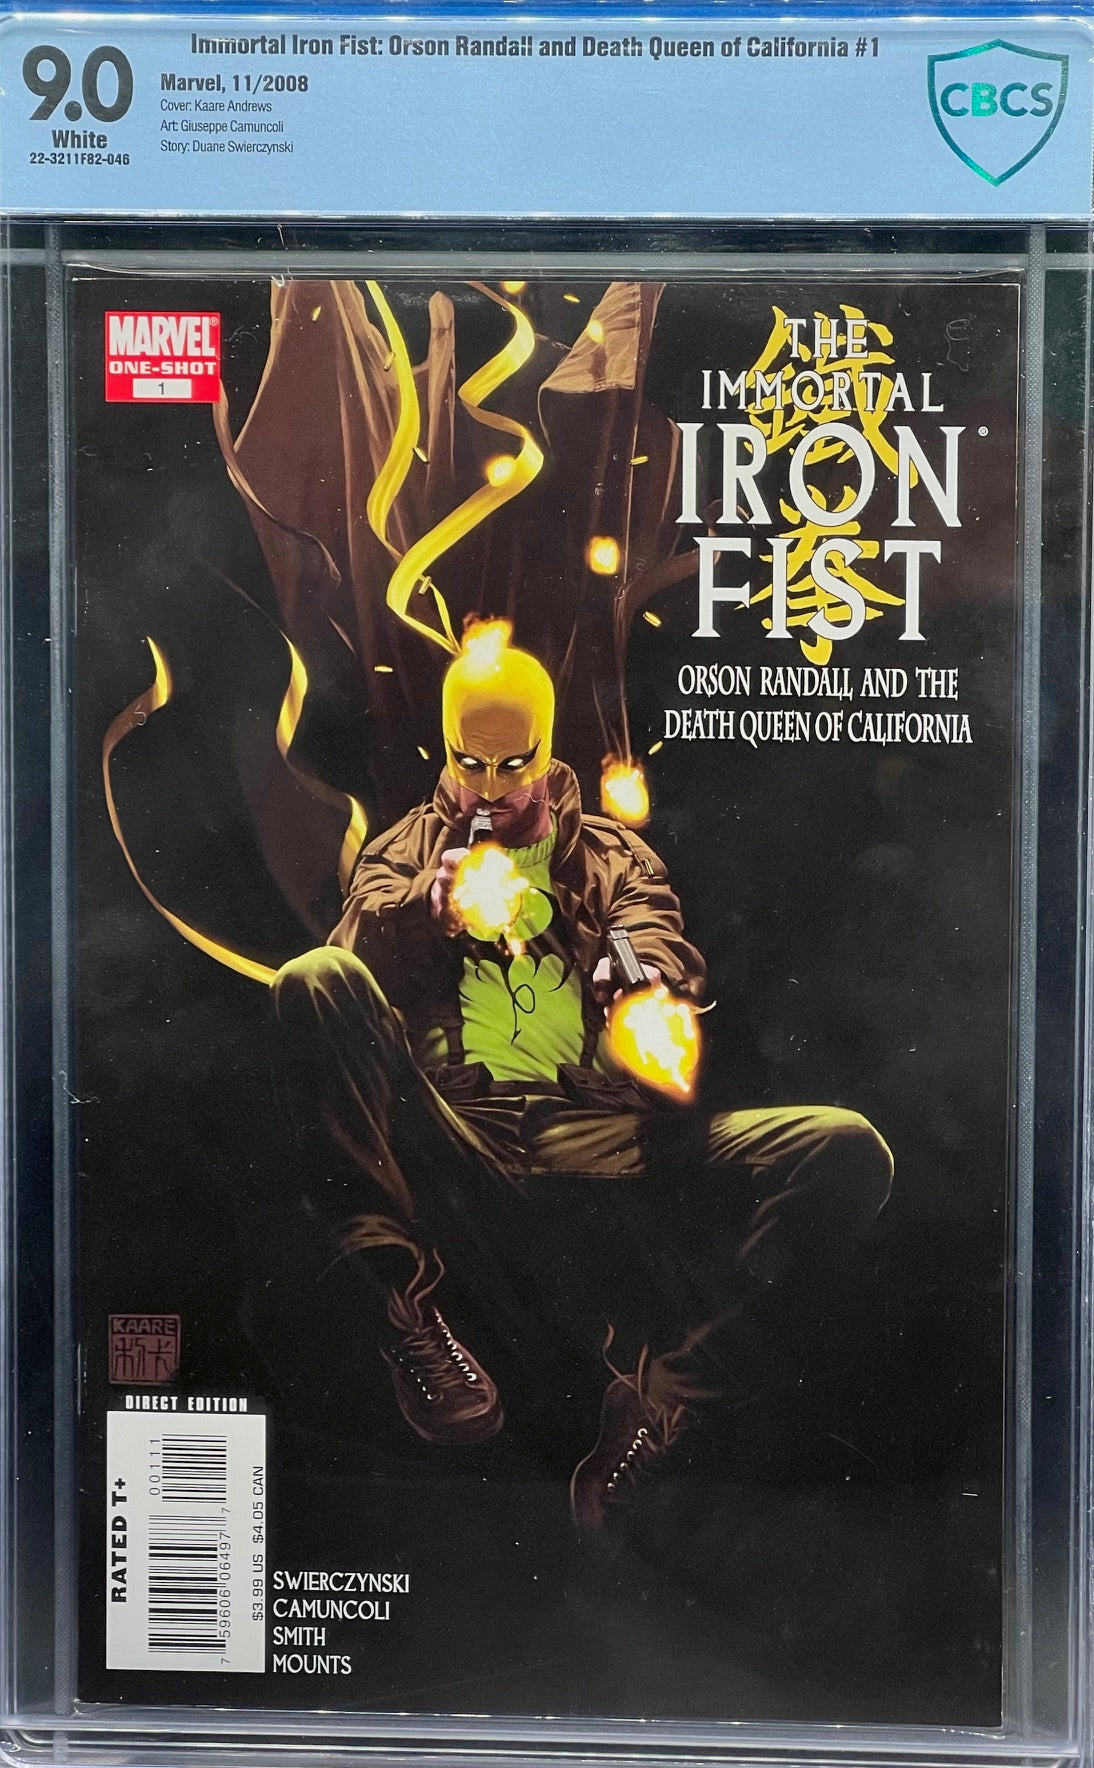 Immortal Iron Fist: Orson Randall and Death Queen of California #1 CBCS 9.0 Blue Label